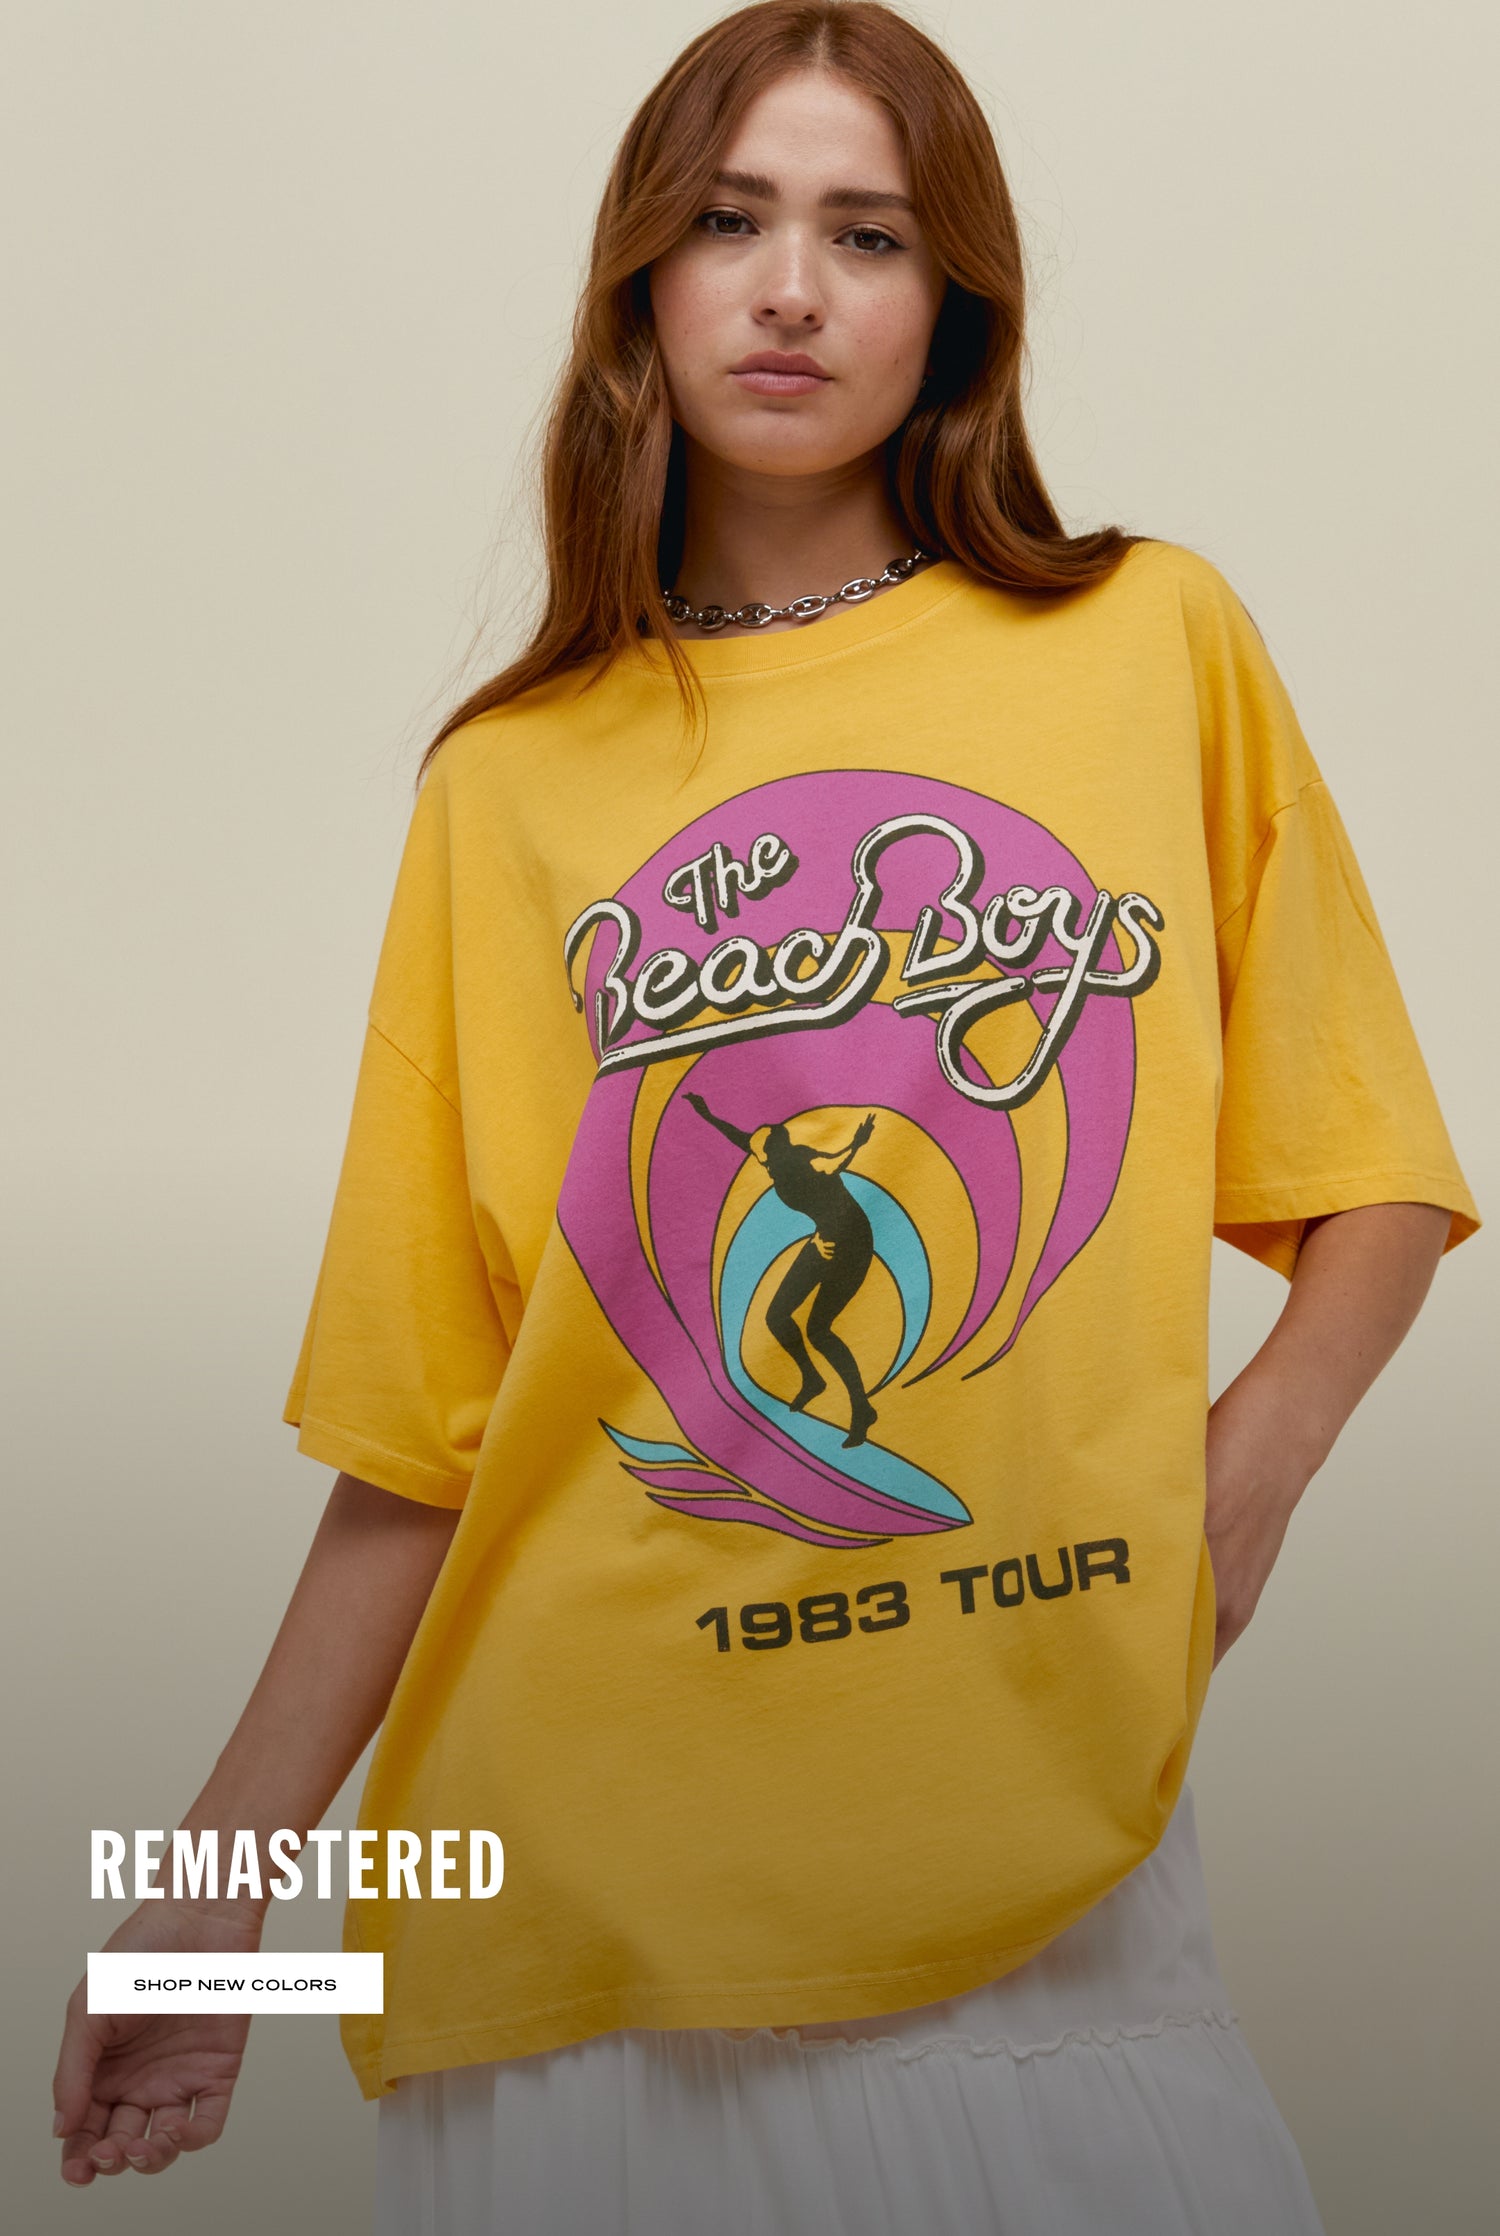 Straight haired model wearing The Beach Boys 1983 Tour oversized graphic tee in yellow.